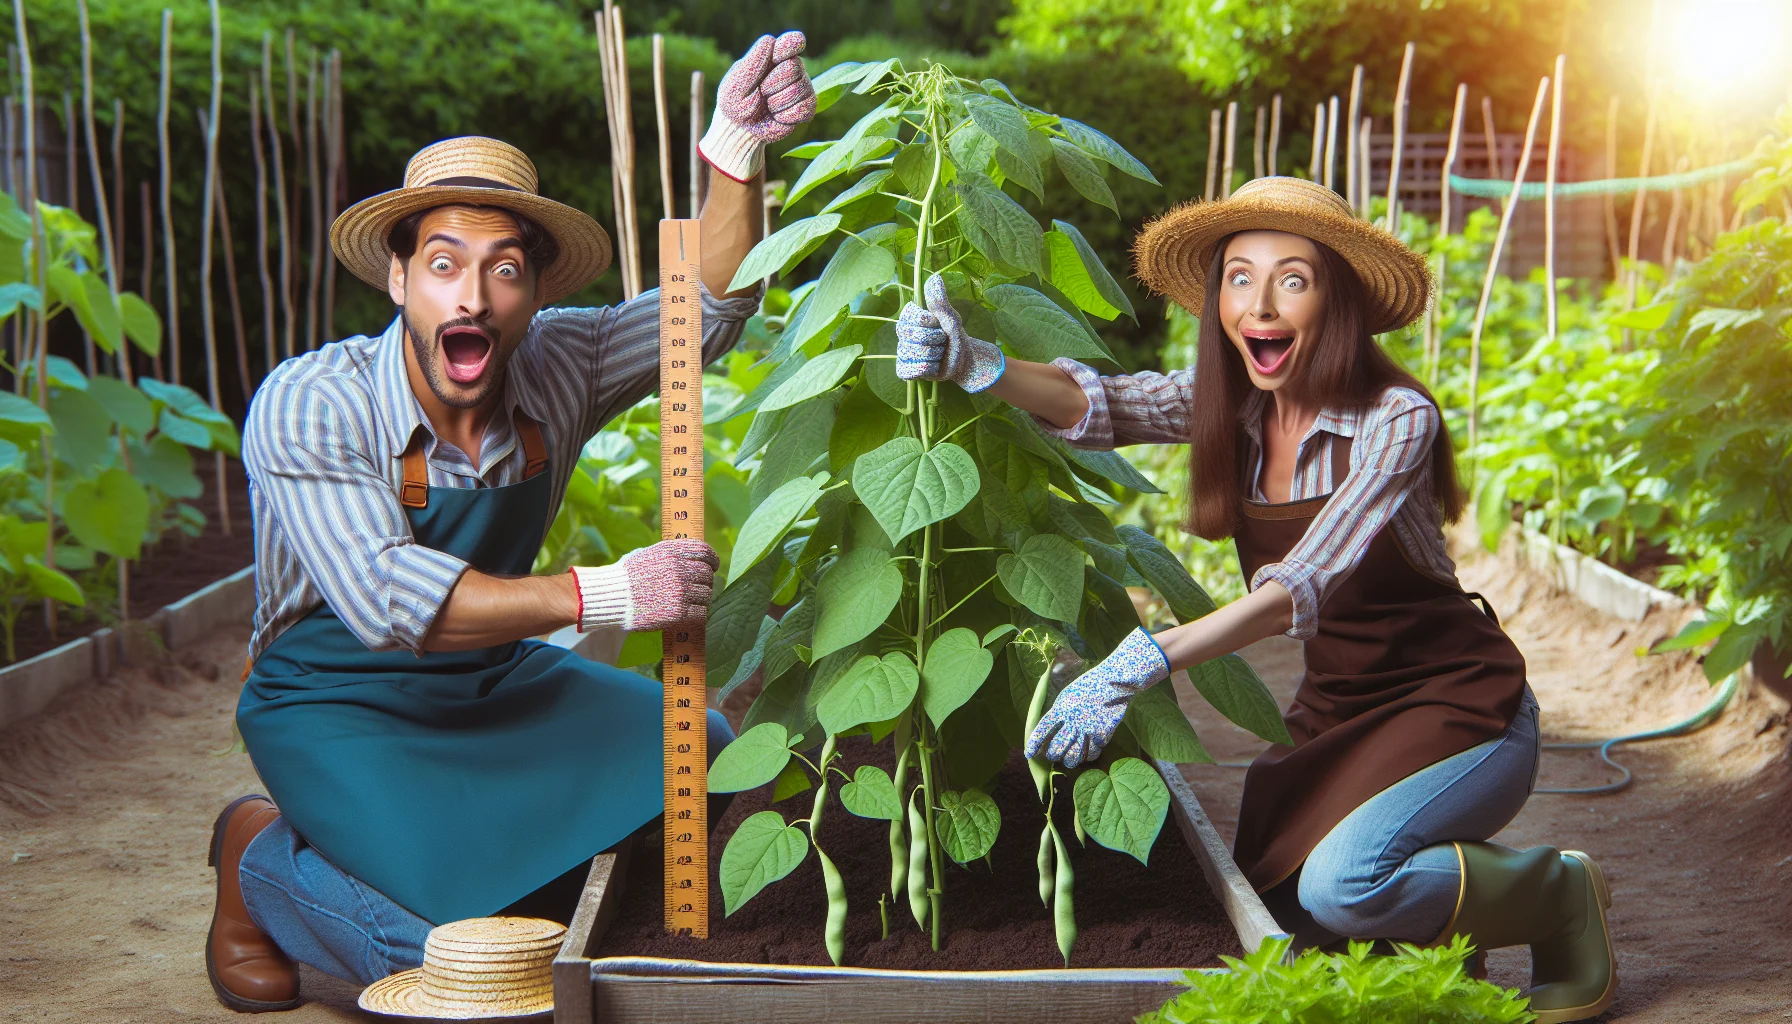 Create a humorous and realistic image focusing on the joy of gardening. The main focus of this image will be growing bush beans. Imagine a scene where a Caucasian male gardener and a Hispanic female gardener, both in their gardening attire: straw hats, gloves and aprons, are in a friendly competition. They're each holding a ruler, measuring the height of their respective bush bean plants, displaying exaggerated expressions of amazement. The garden is absolutely lush, teeming with various vegetable plants. It's a cheerful and charming image that highlights the rewarding aspect of gardening.